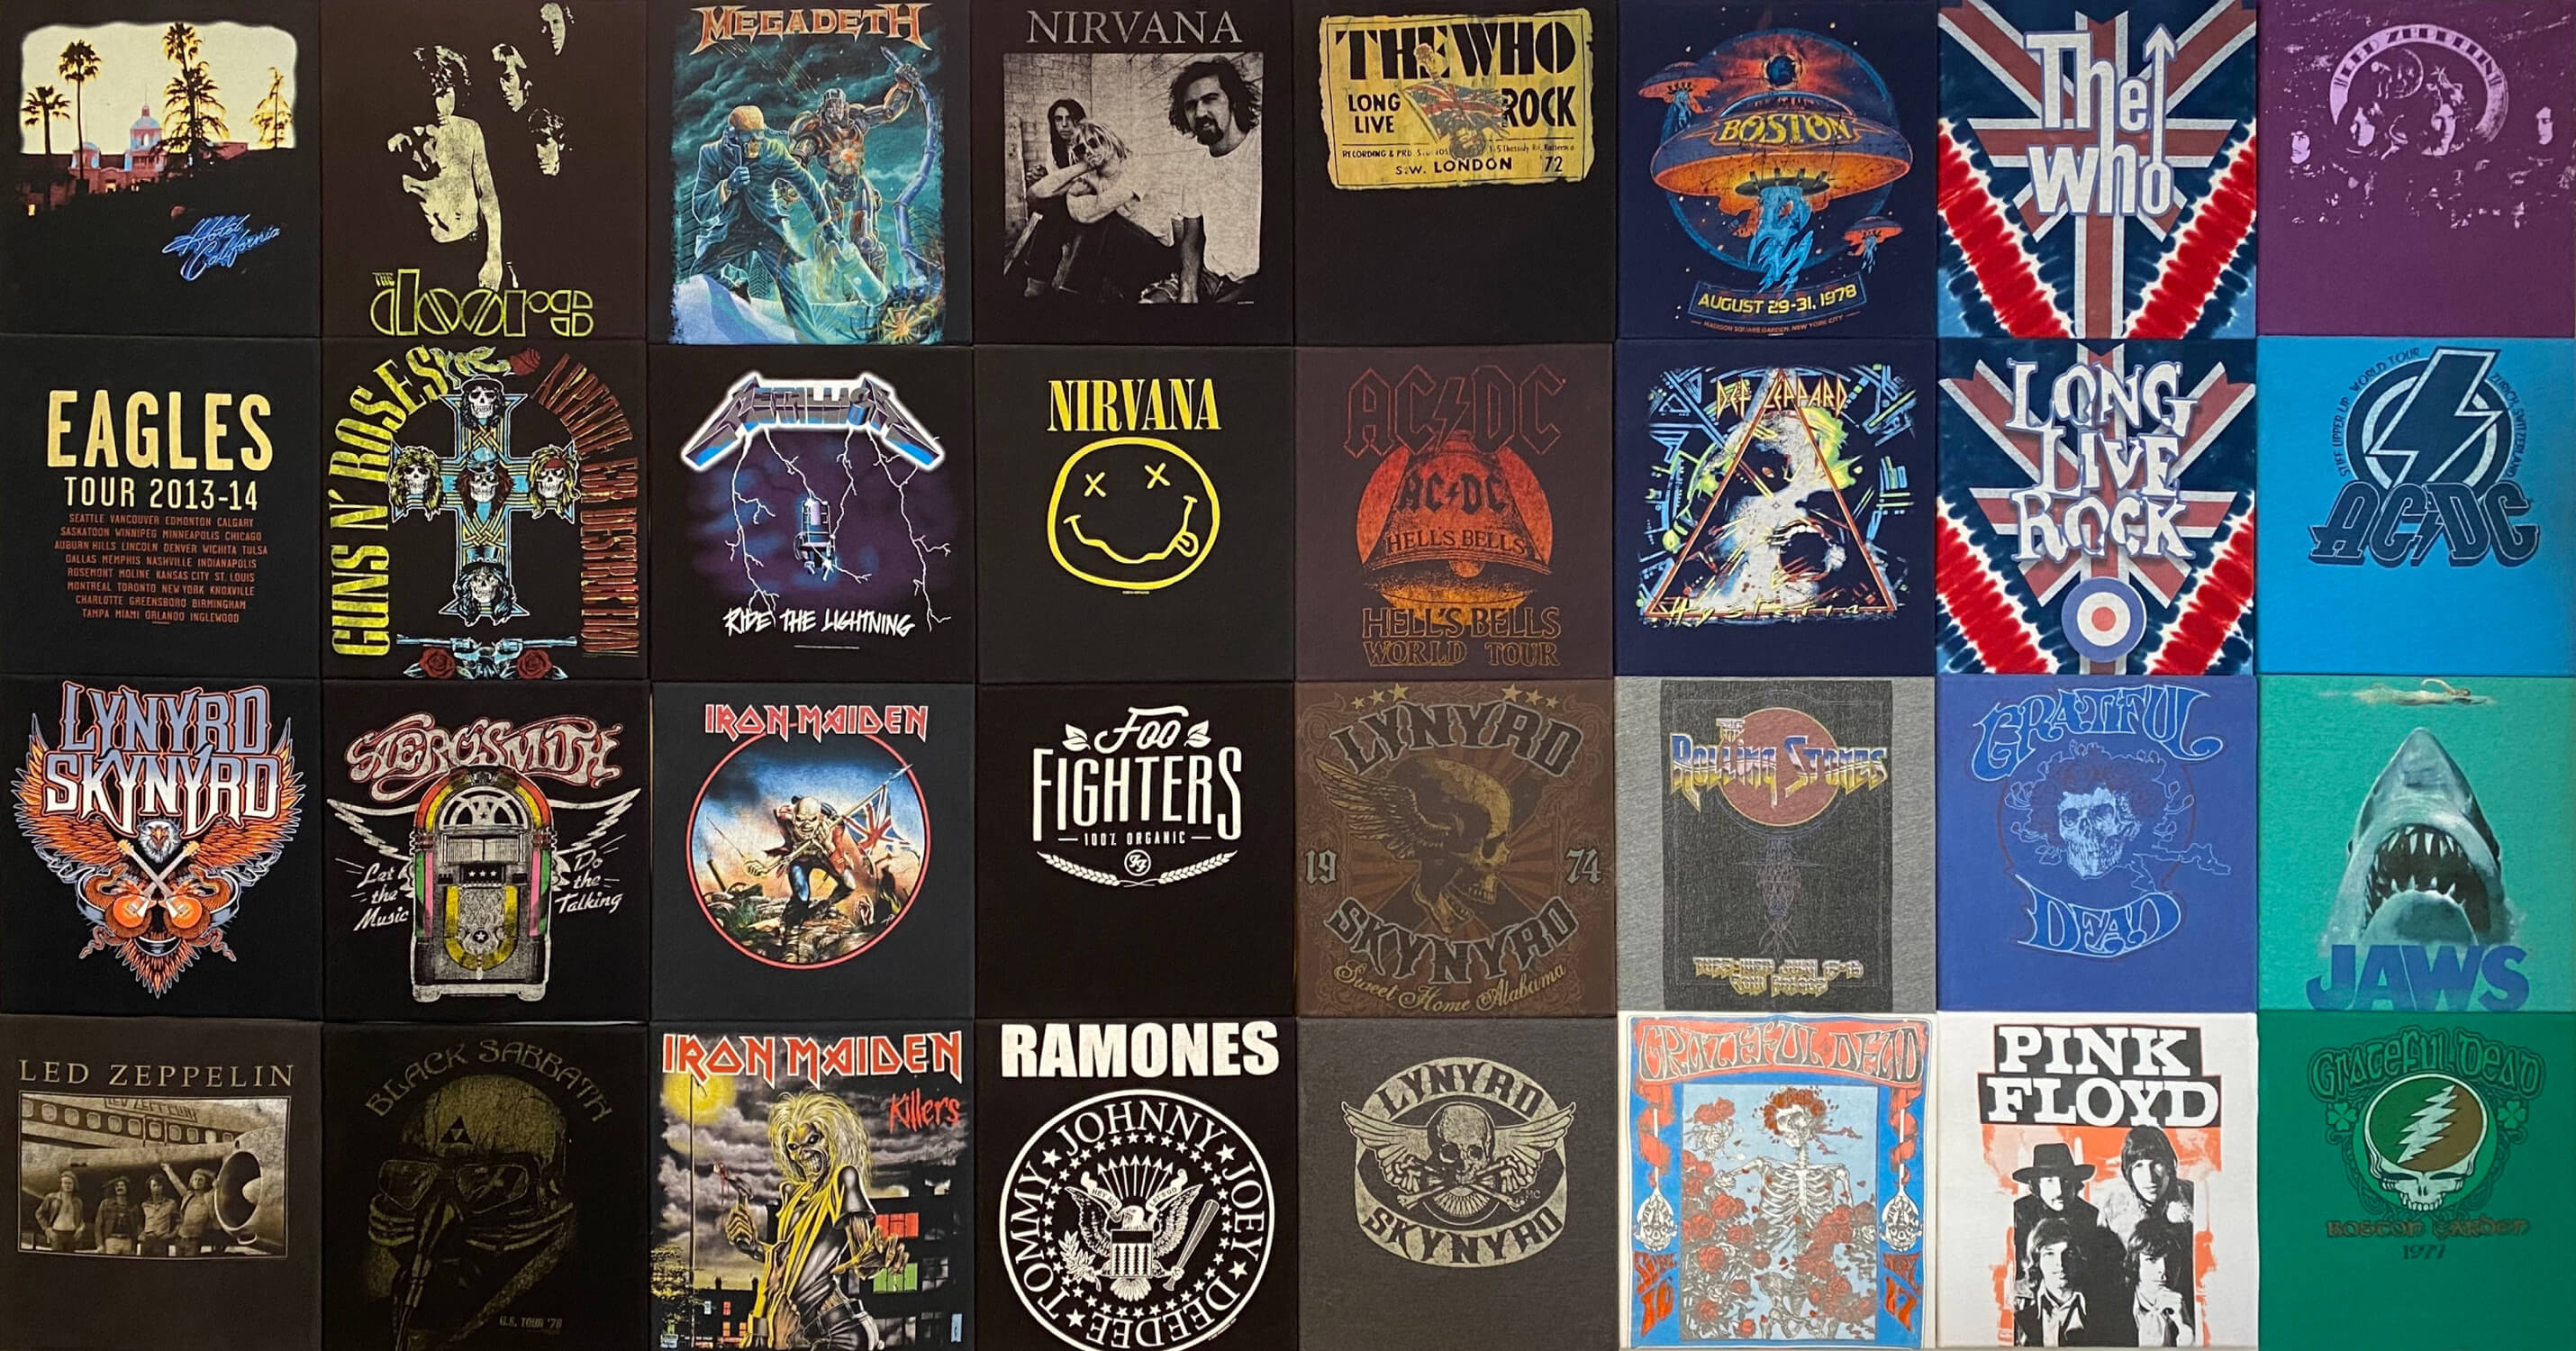 rock and metal music tshirts hung on square canvases in a grid pattern on a wall